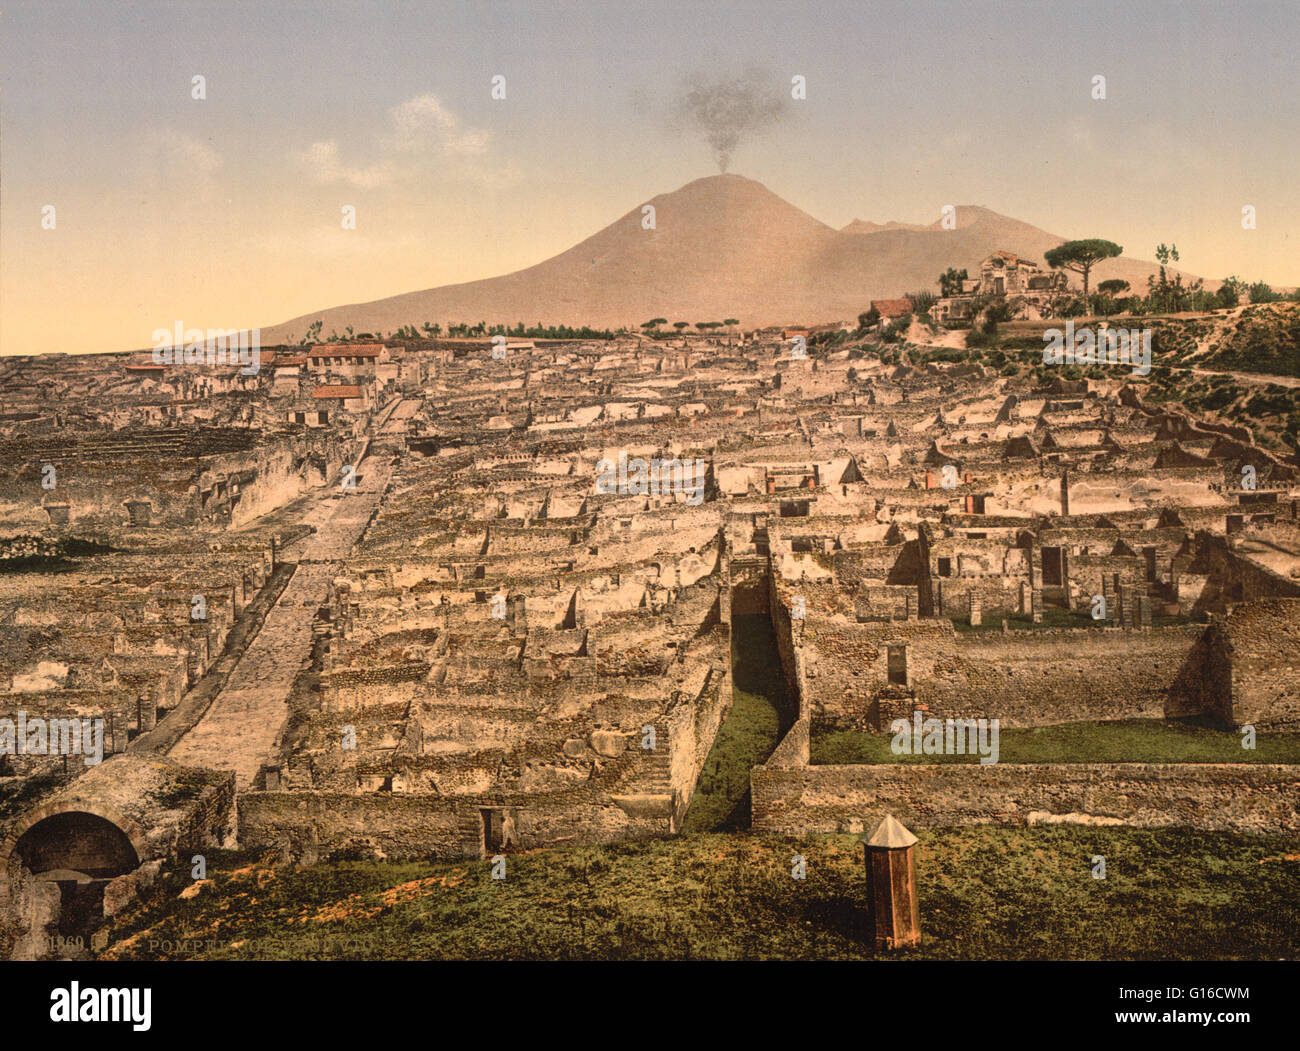 The city of Pompeii was an ancient Roman town city near 